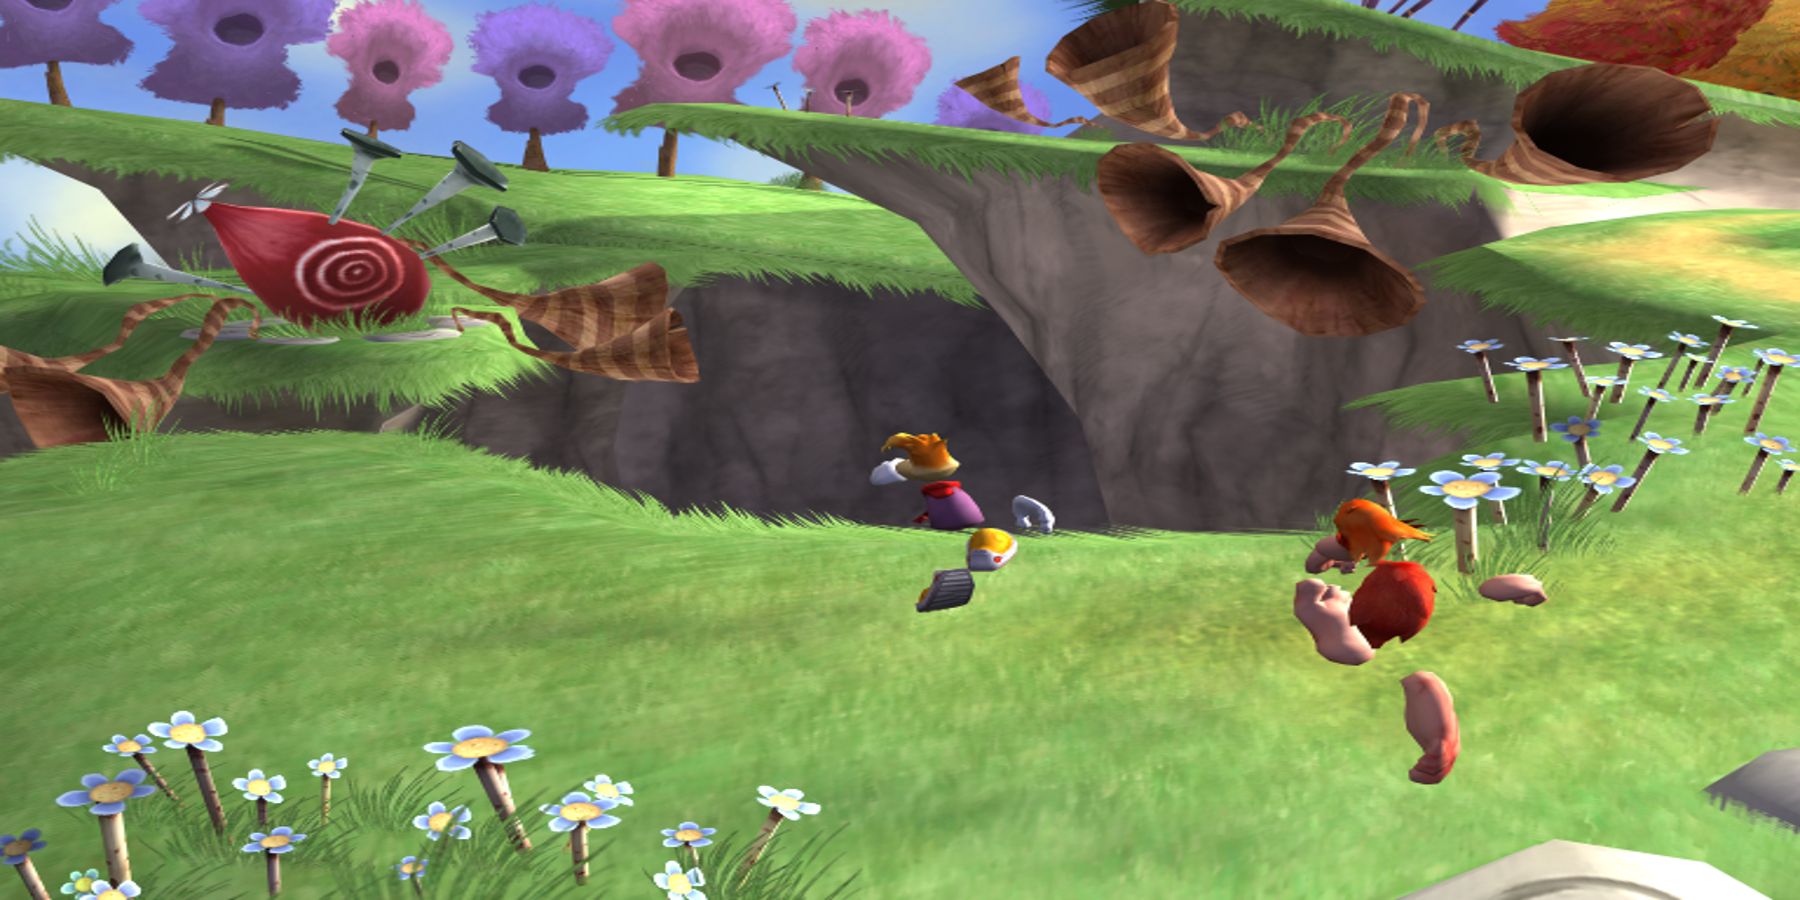 Rayman 4 Prototype footage showing Rayman with a companion following